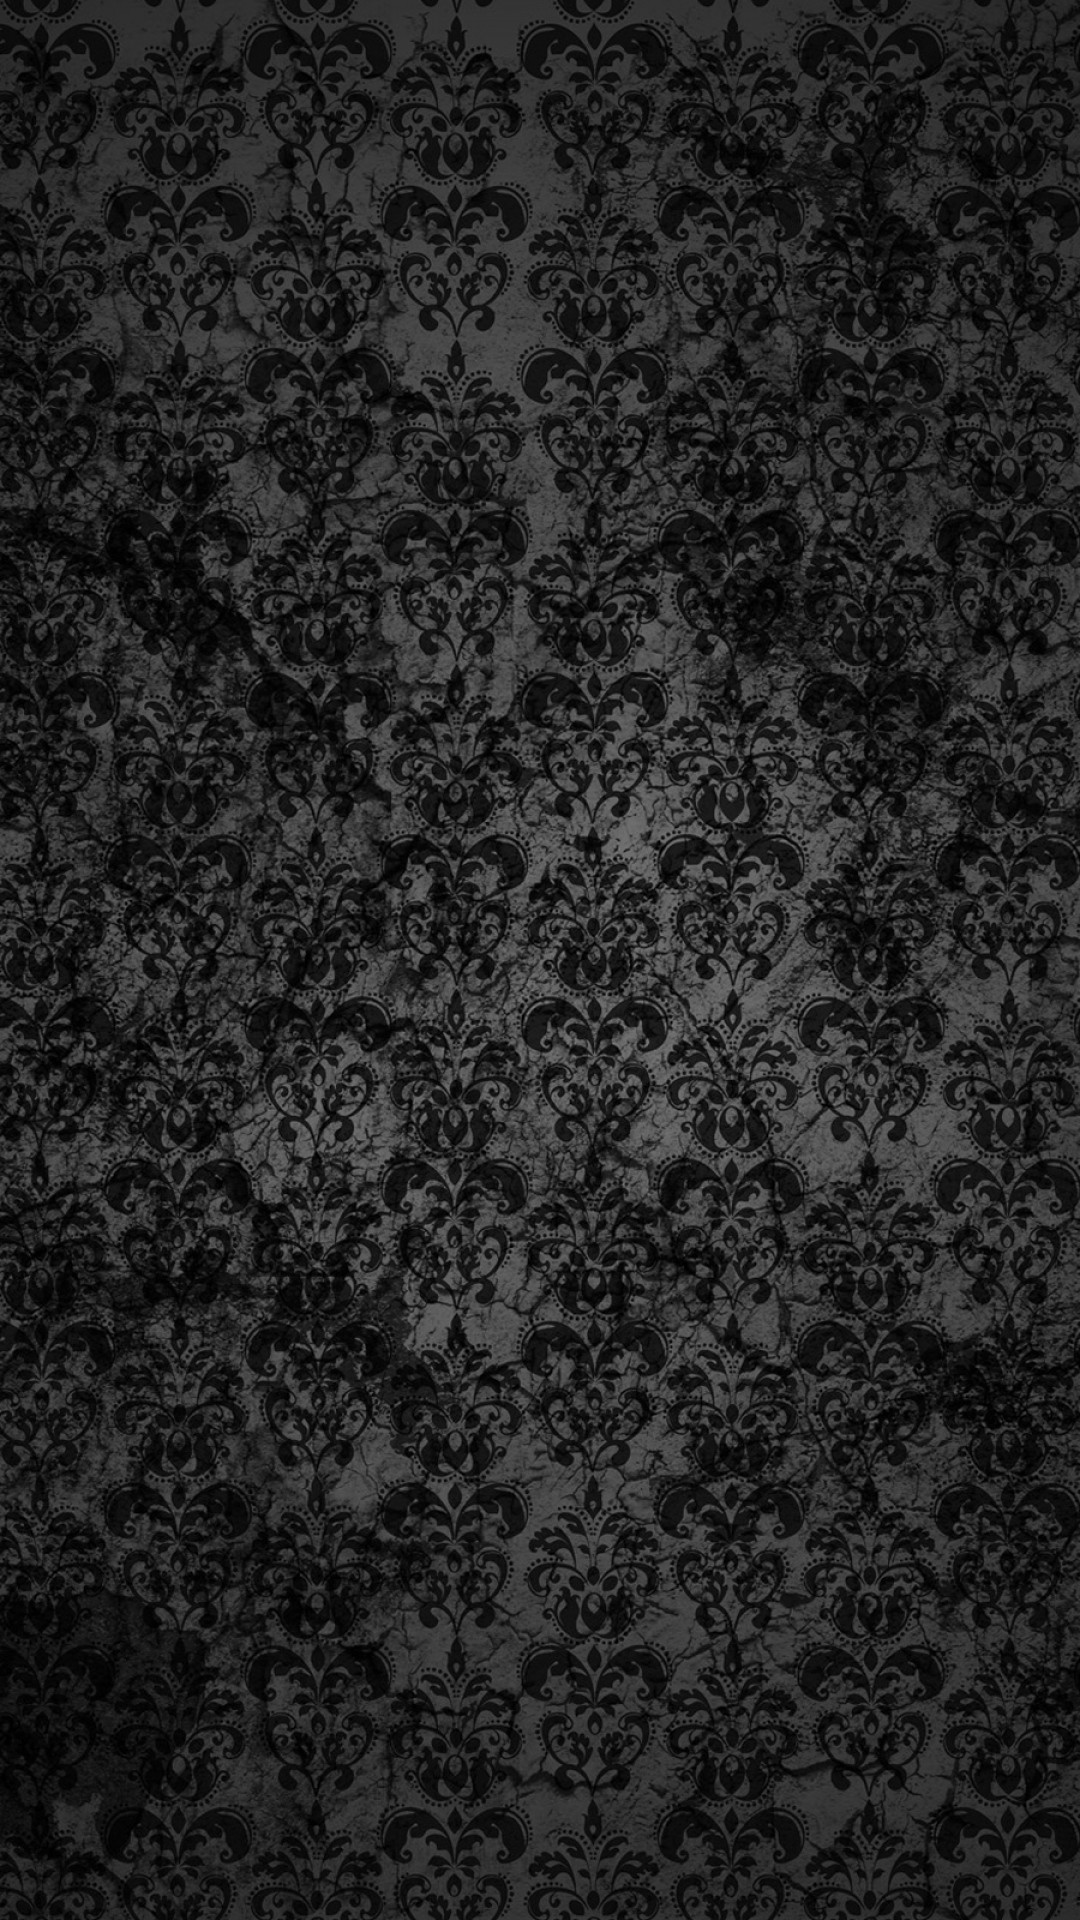 1080x1920 Black Lace Pattern Android Wallpaper ...